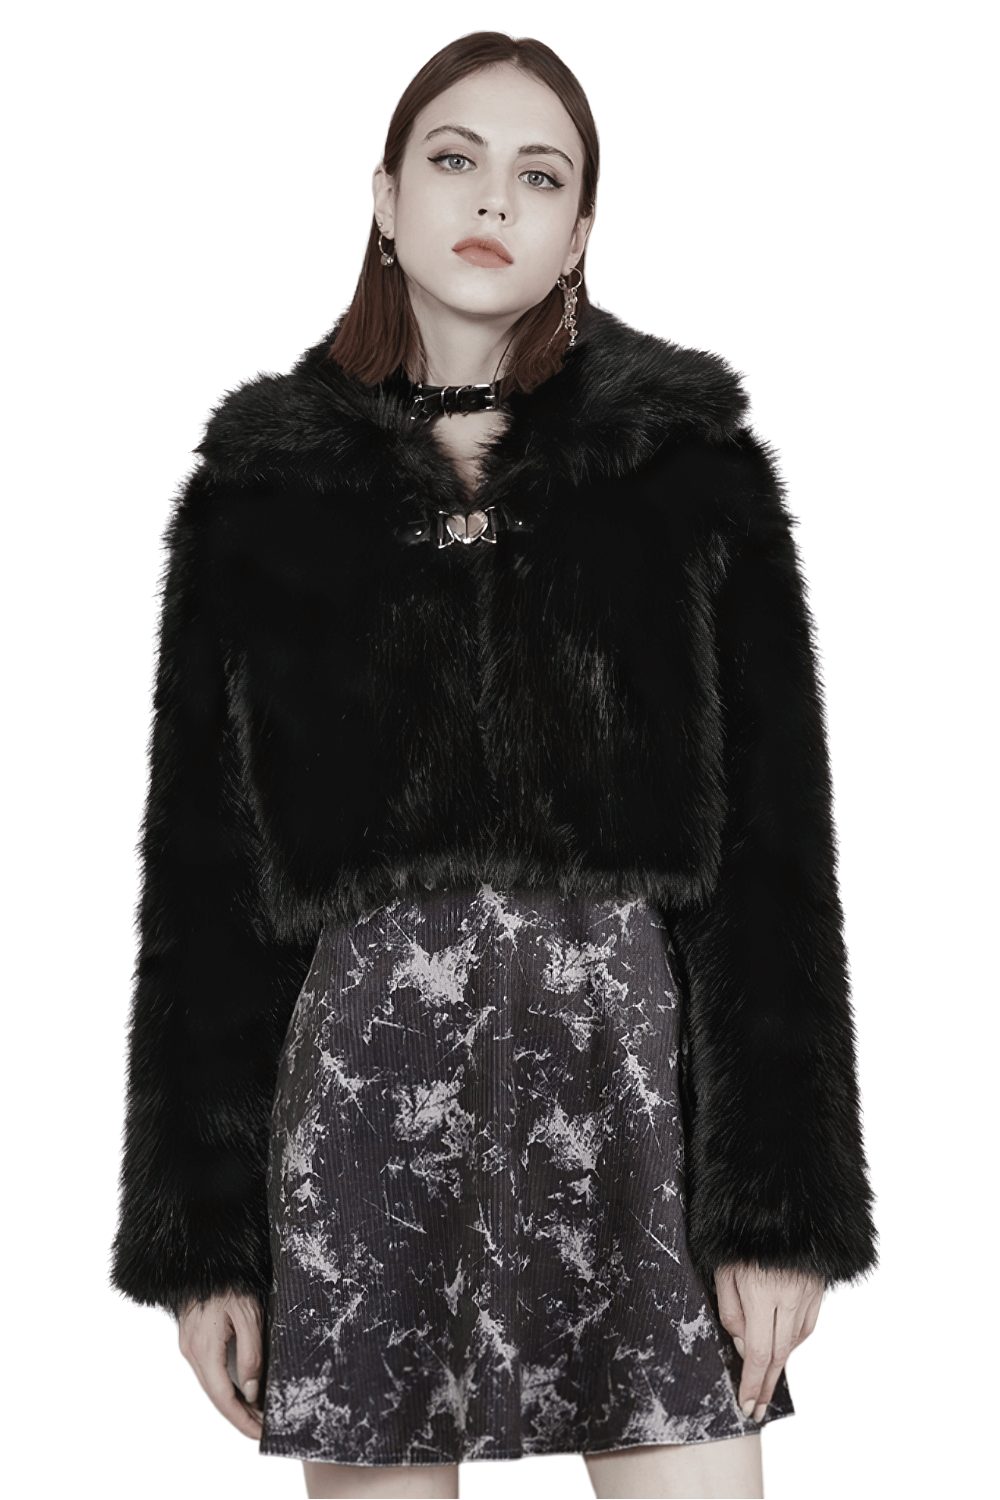 Chic Black Faux Fur Cropped Jacket with Buckle